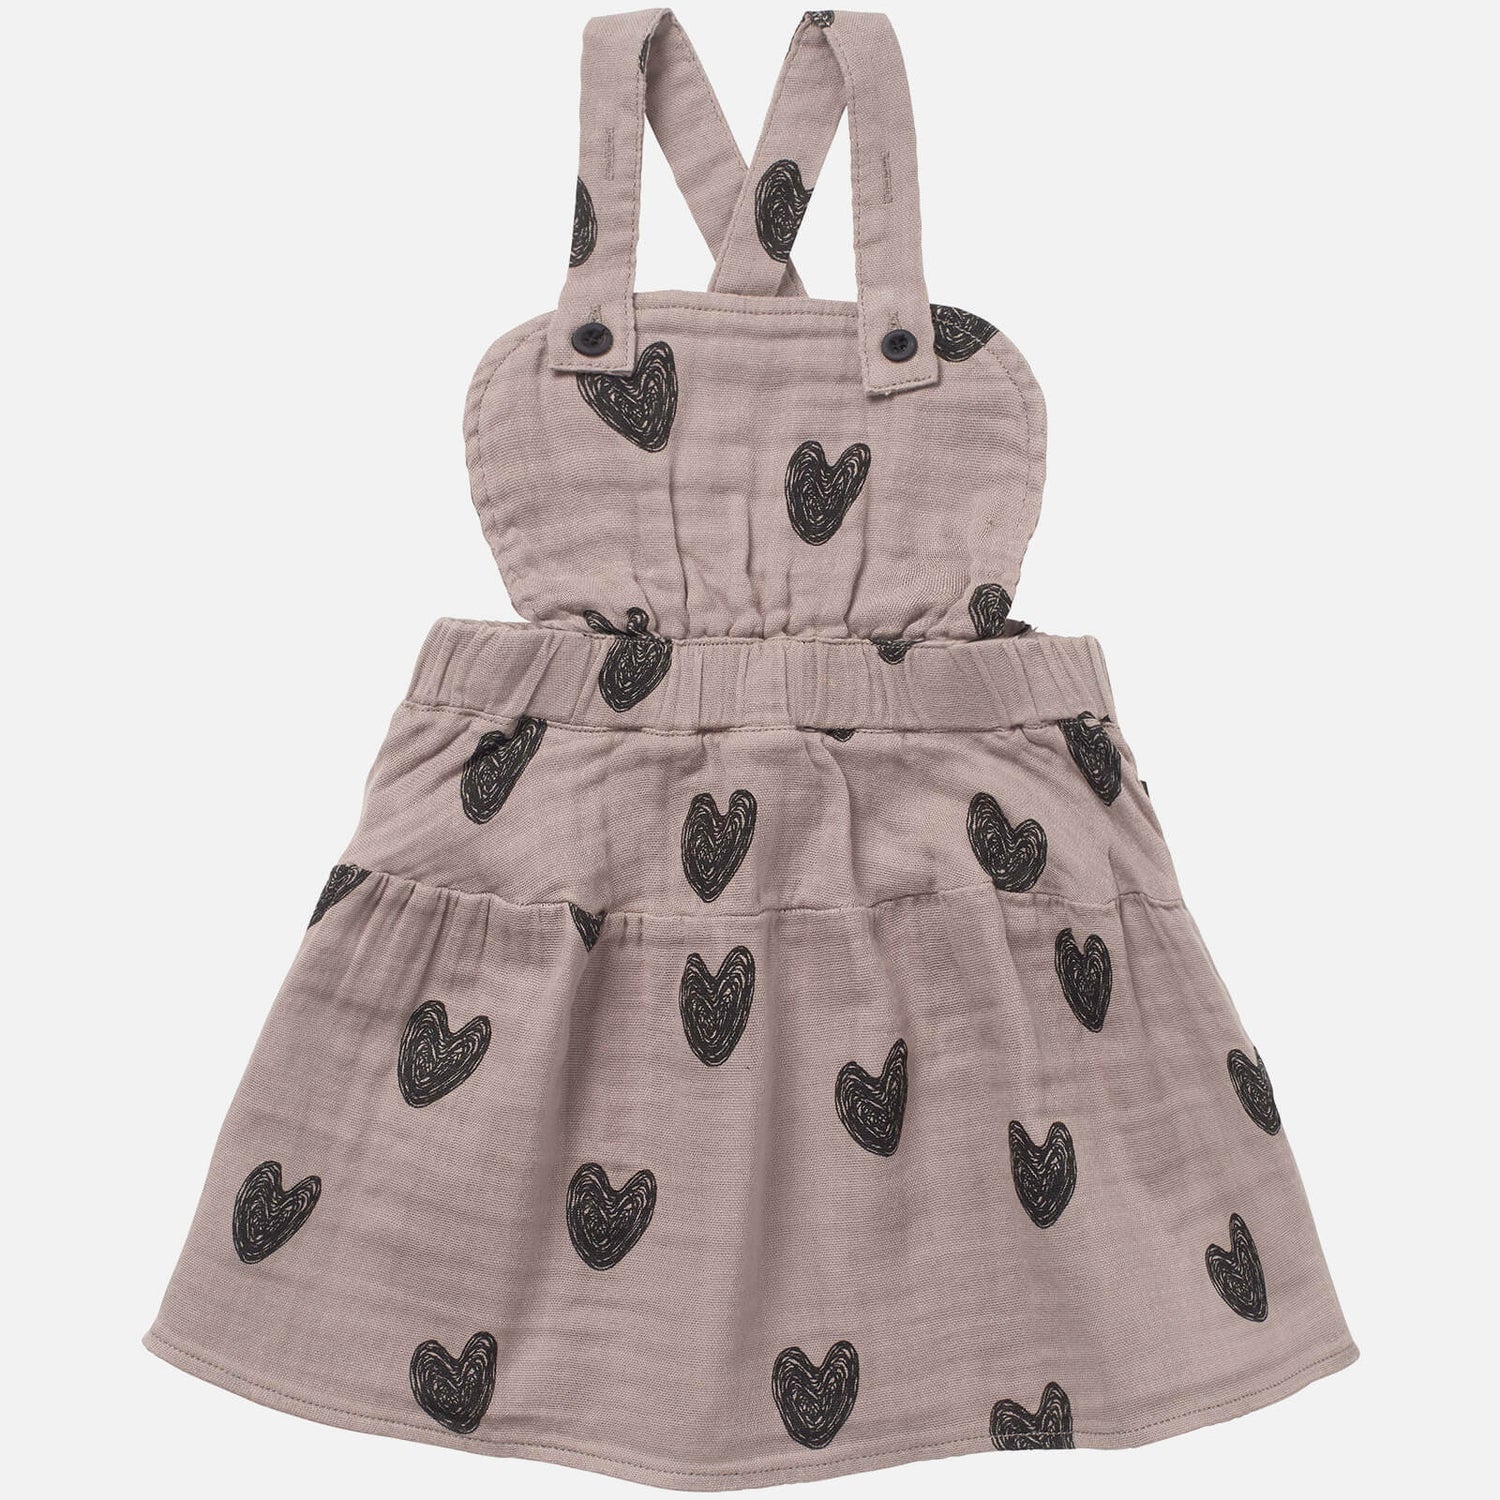 Sproet + Sprout Salopette Printed Cotton Dress - 12 Months